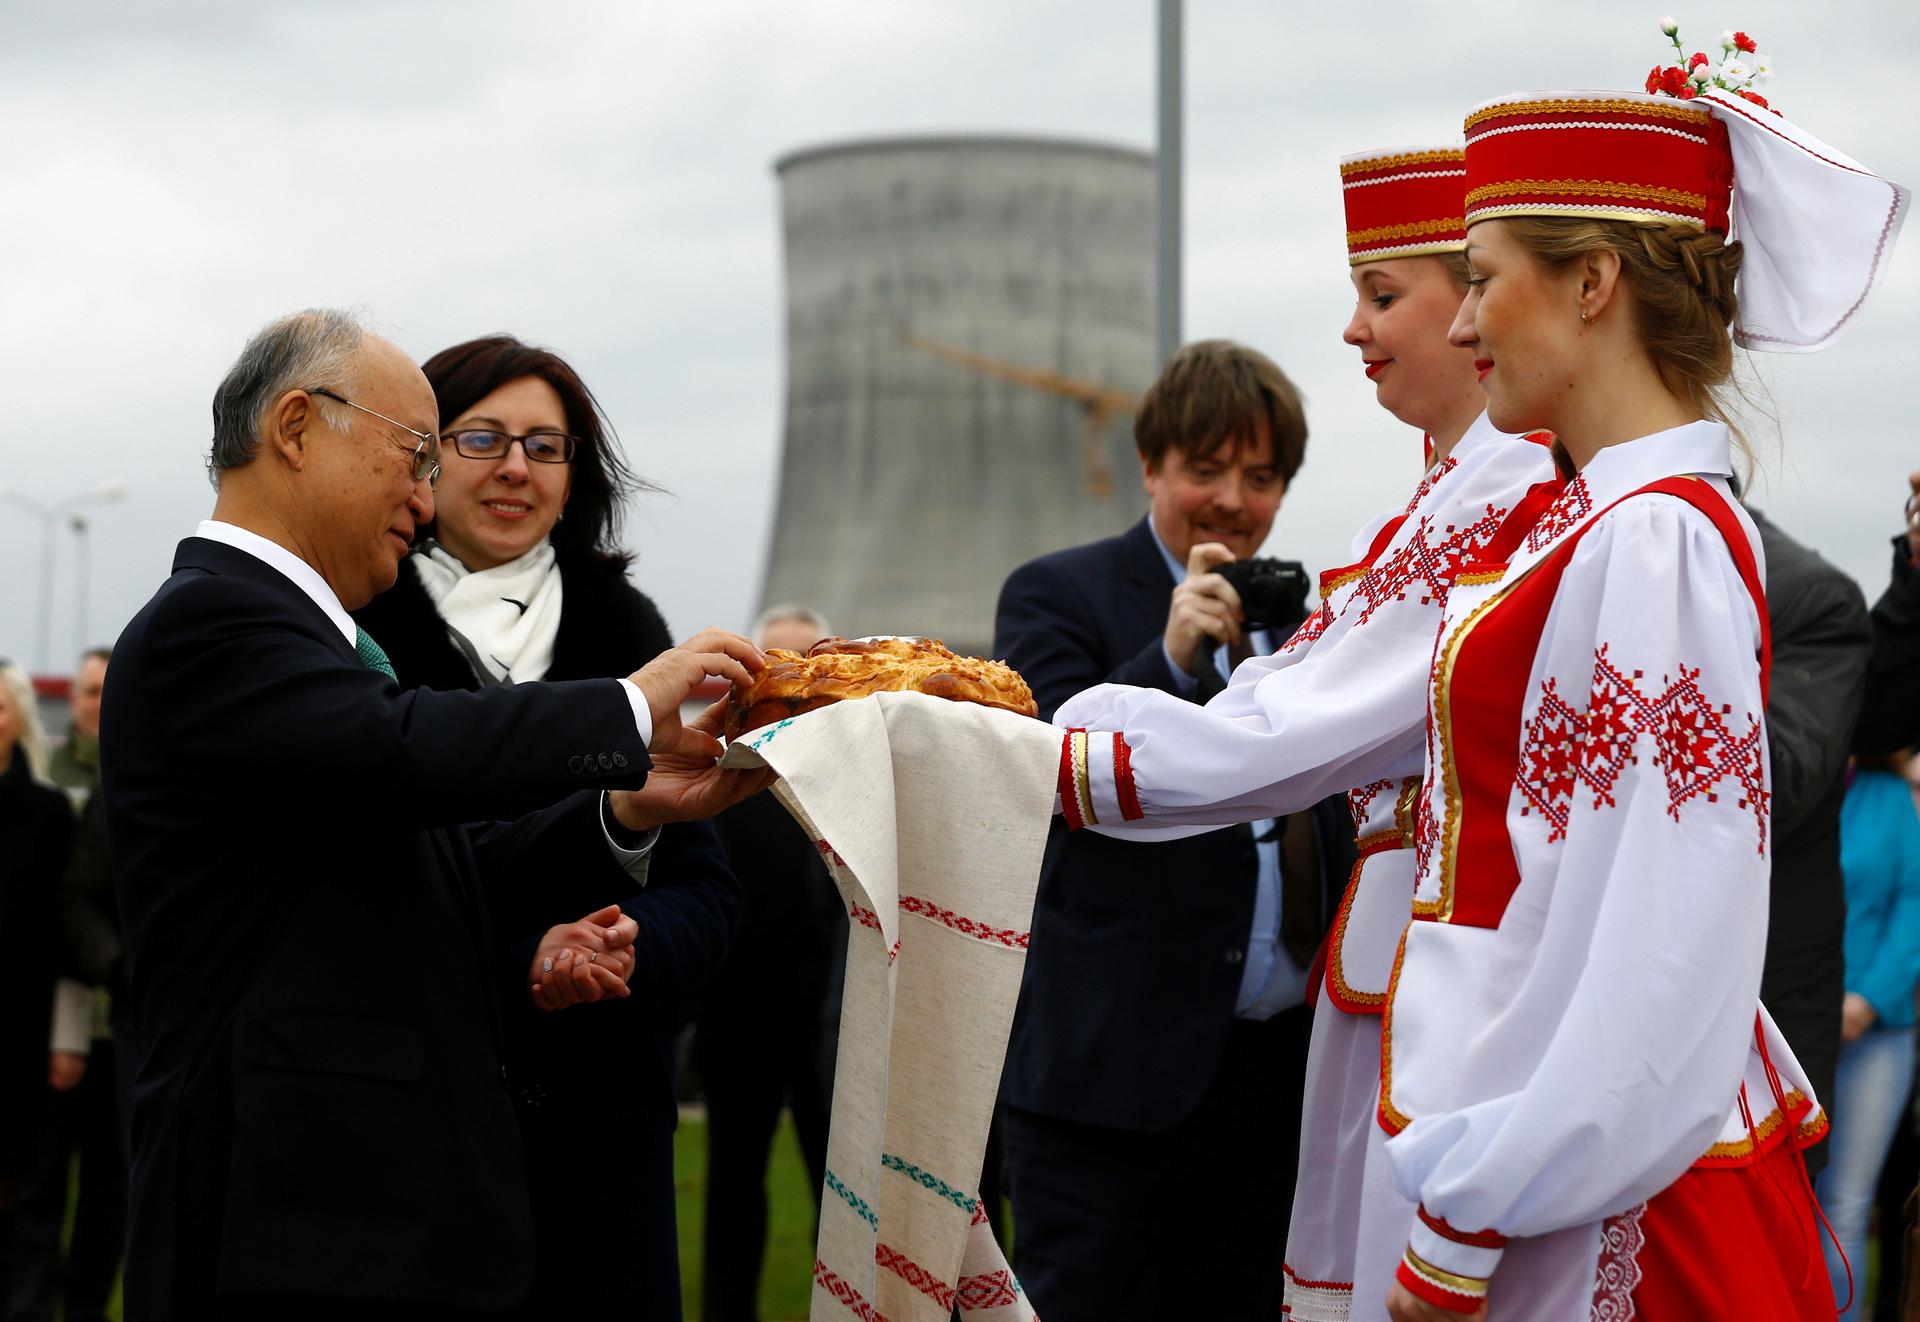 International Atomic Energy Agency (IAEA) Director General Yukiya Amano takes part in a traditional bread and salt ceremony during a visit to the Belarusian nuclear power plant